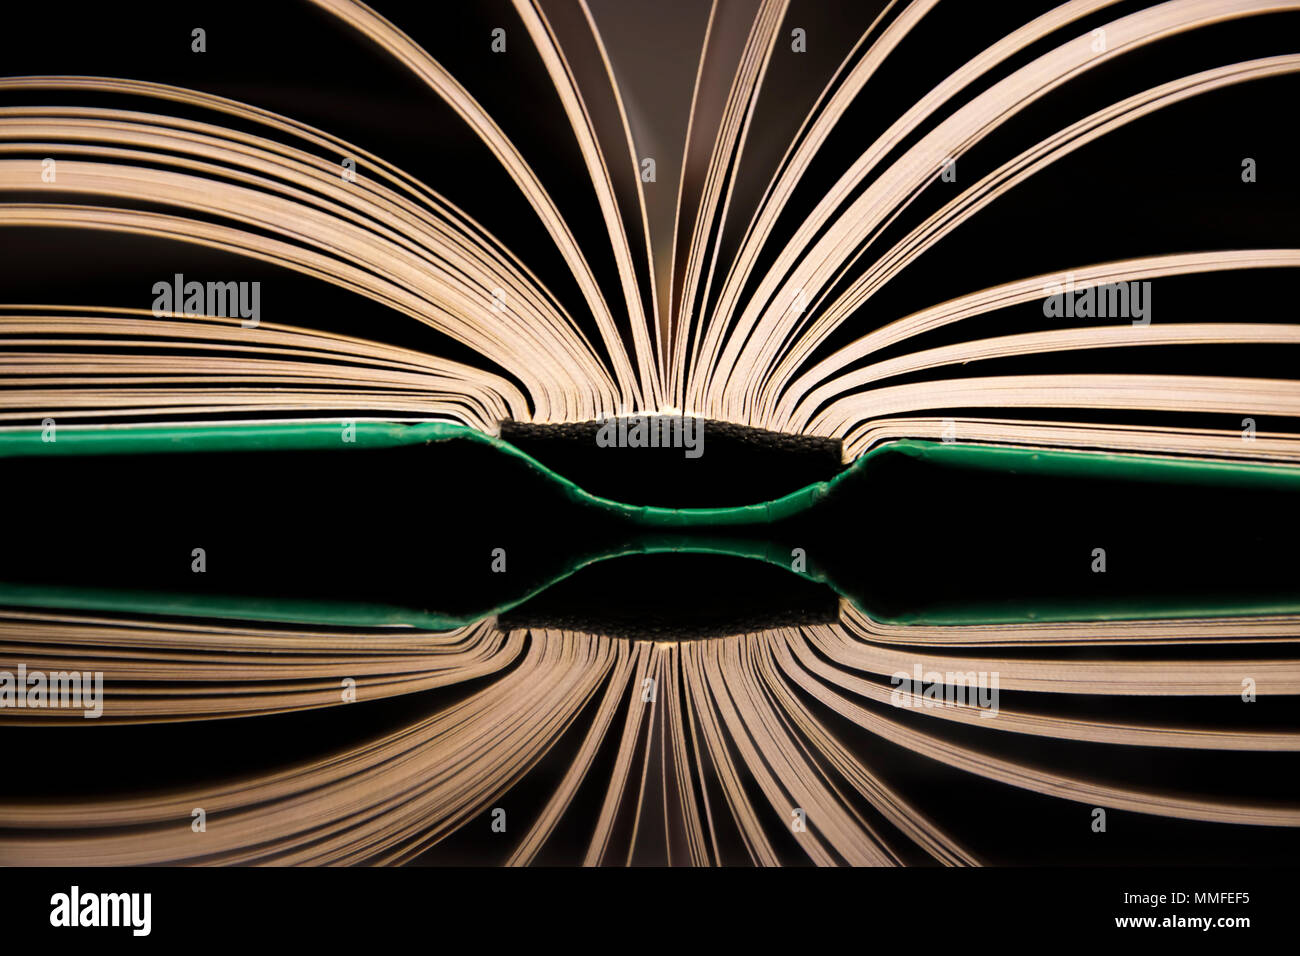 the book, the open book largely with a specular reflection. art. education Stock Photo